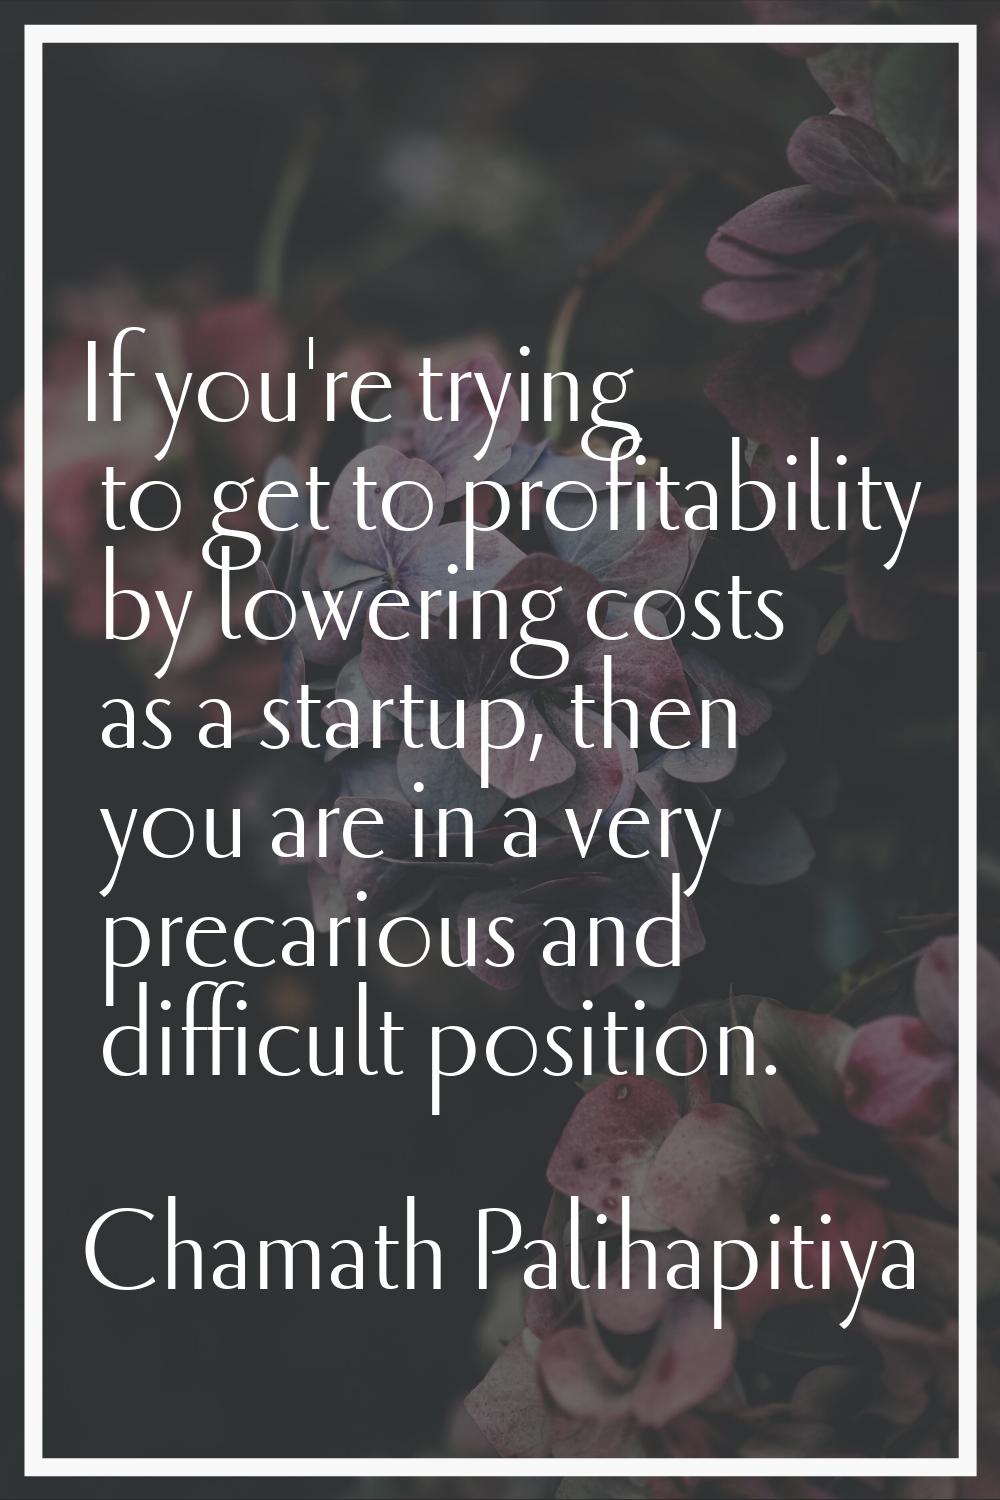 If you're trying to get to profitability by lowering costs as a startup, then you are in a very pre